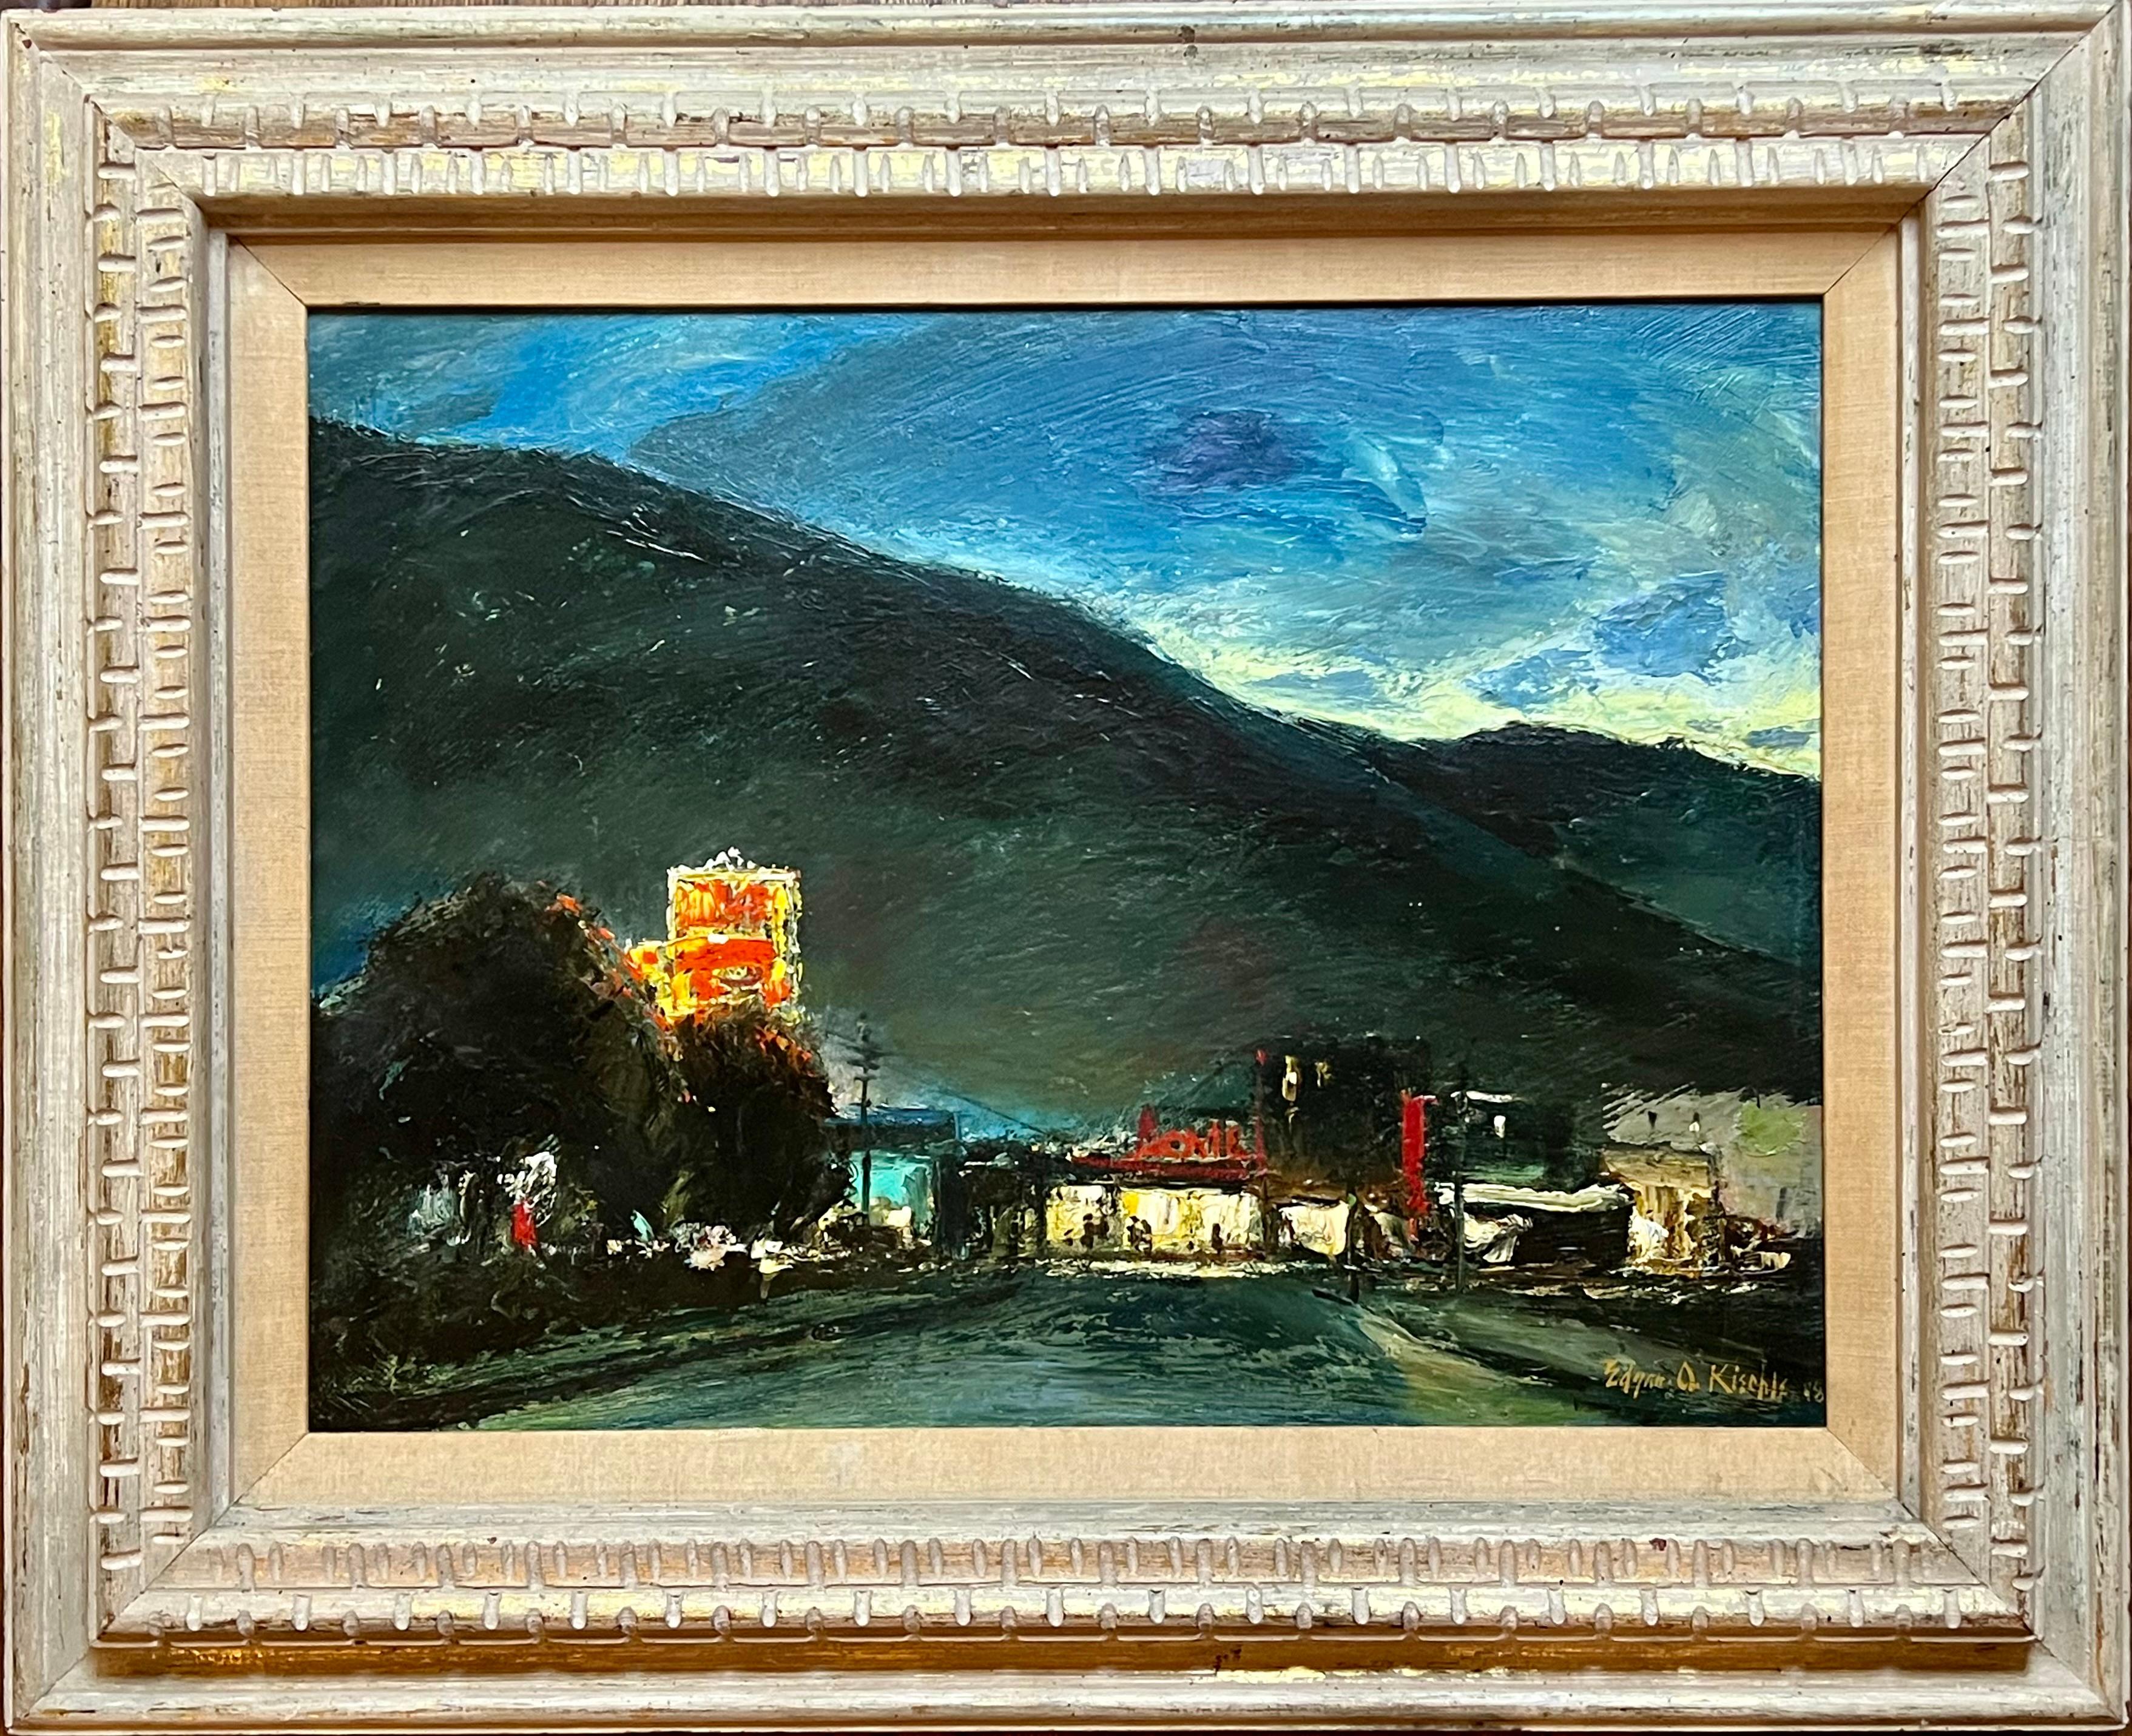 A Valley Streetscape at Night - Painting by Edgar O. Kiechle